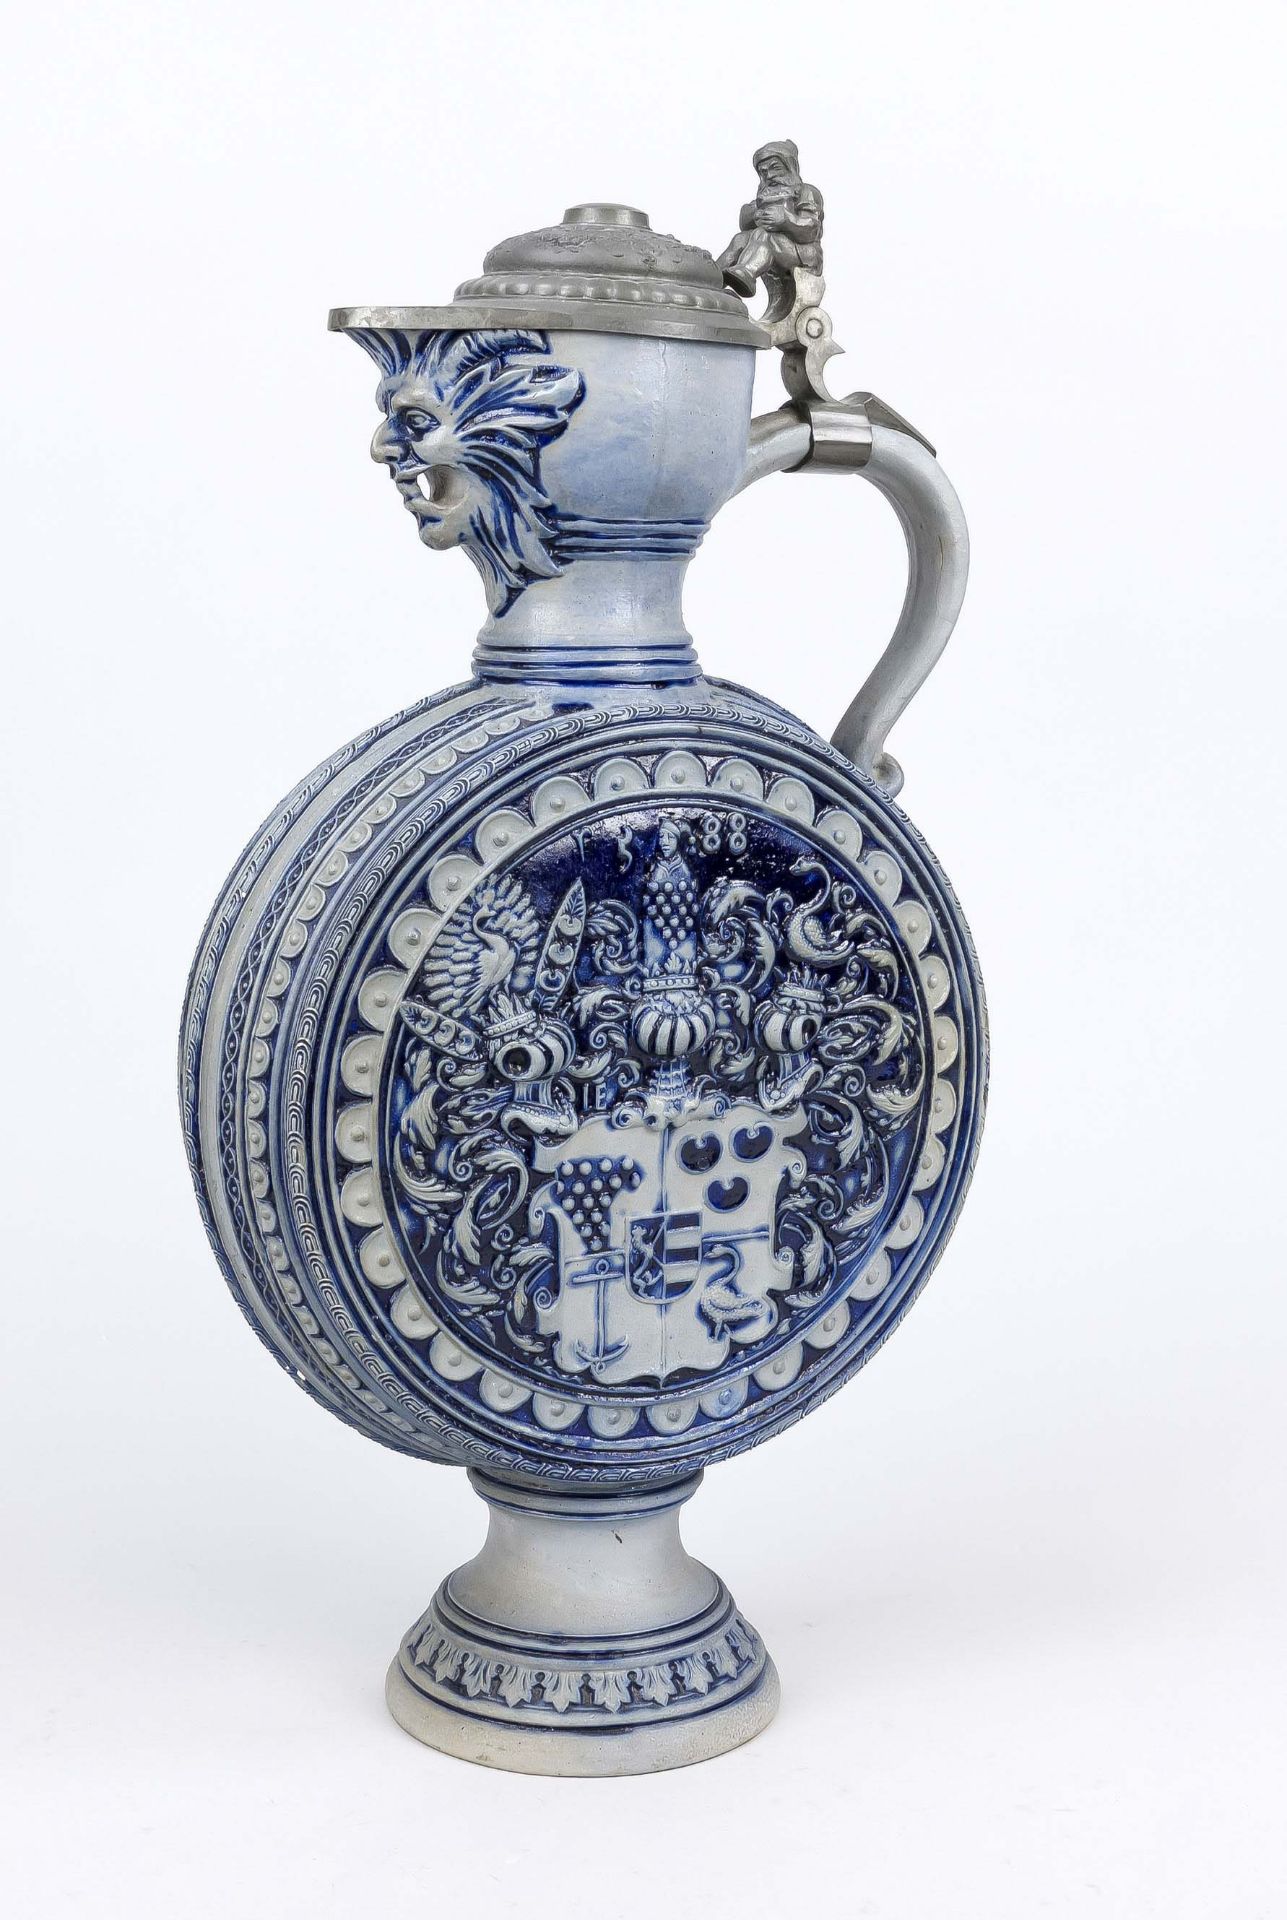 Large wine jug, Westerwald, c. 1880, stoneware in relief, partly glazed blue, overlapping pewter lid